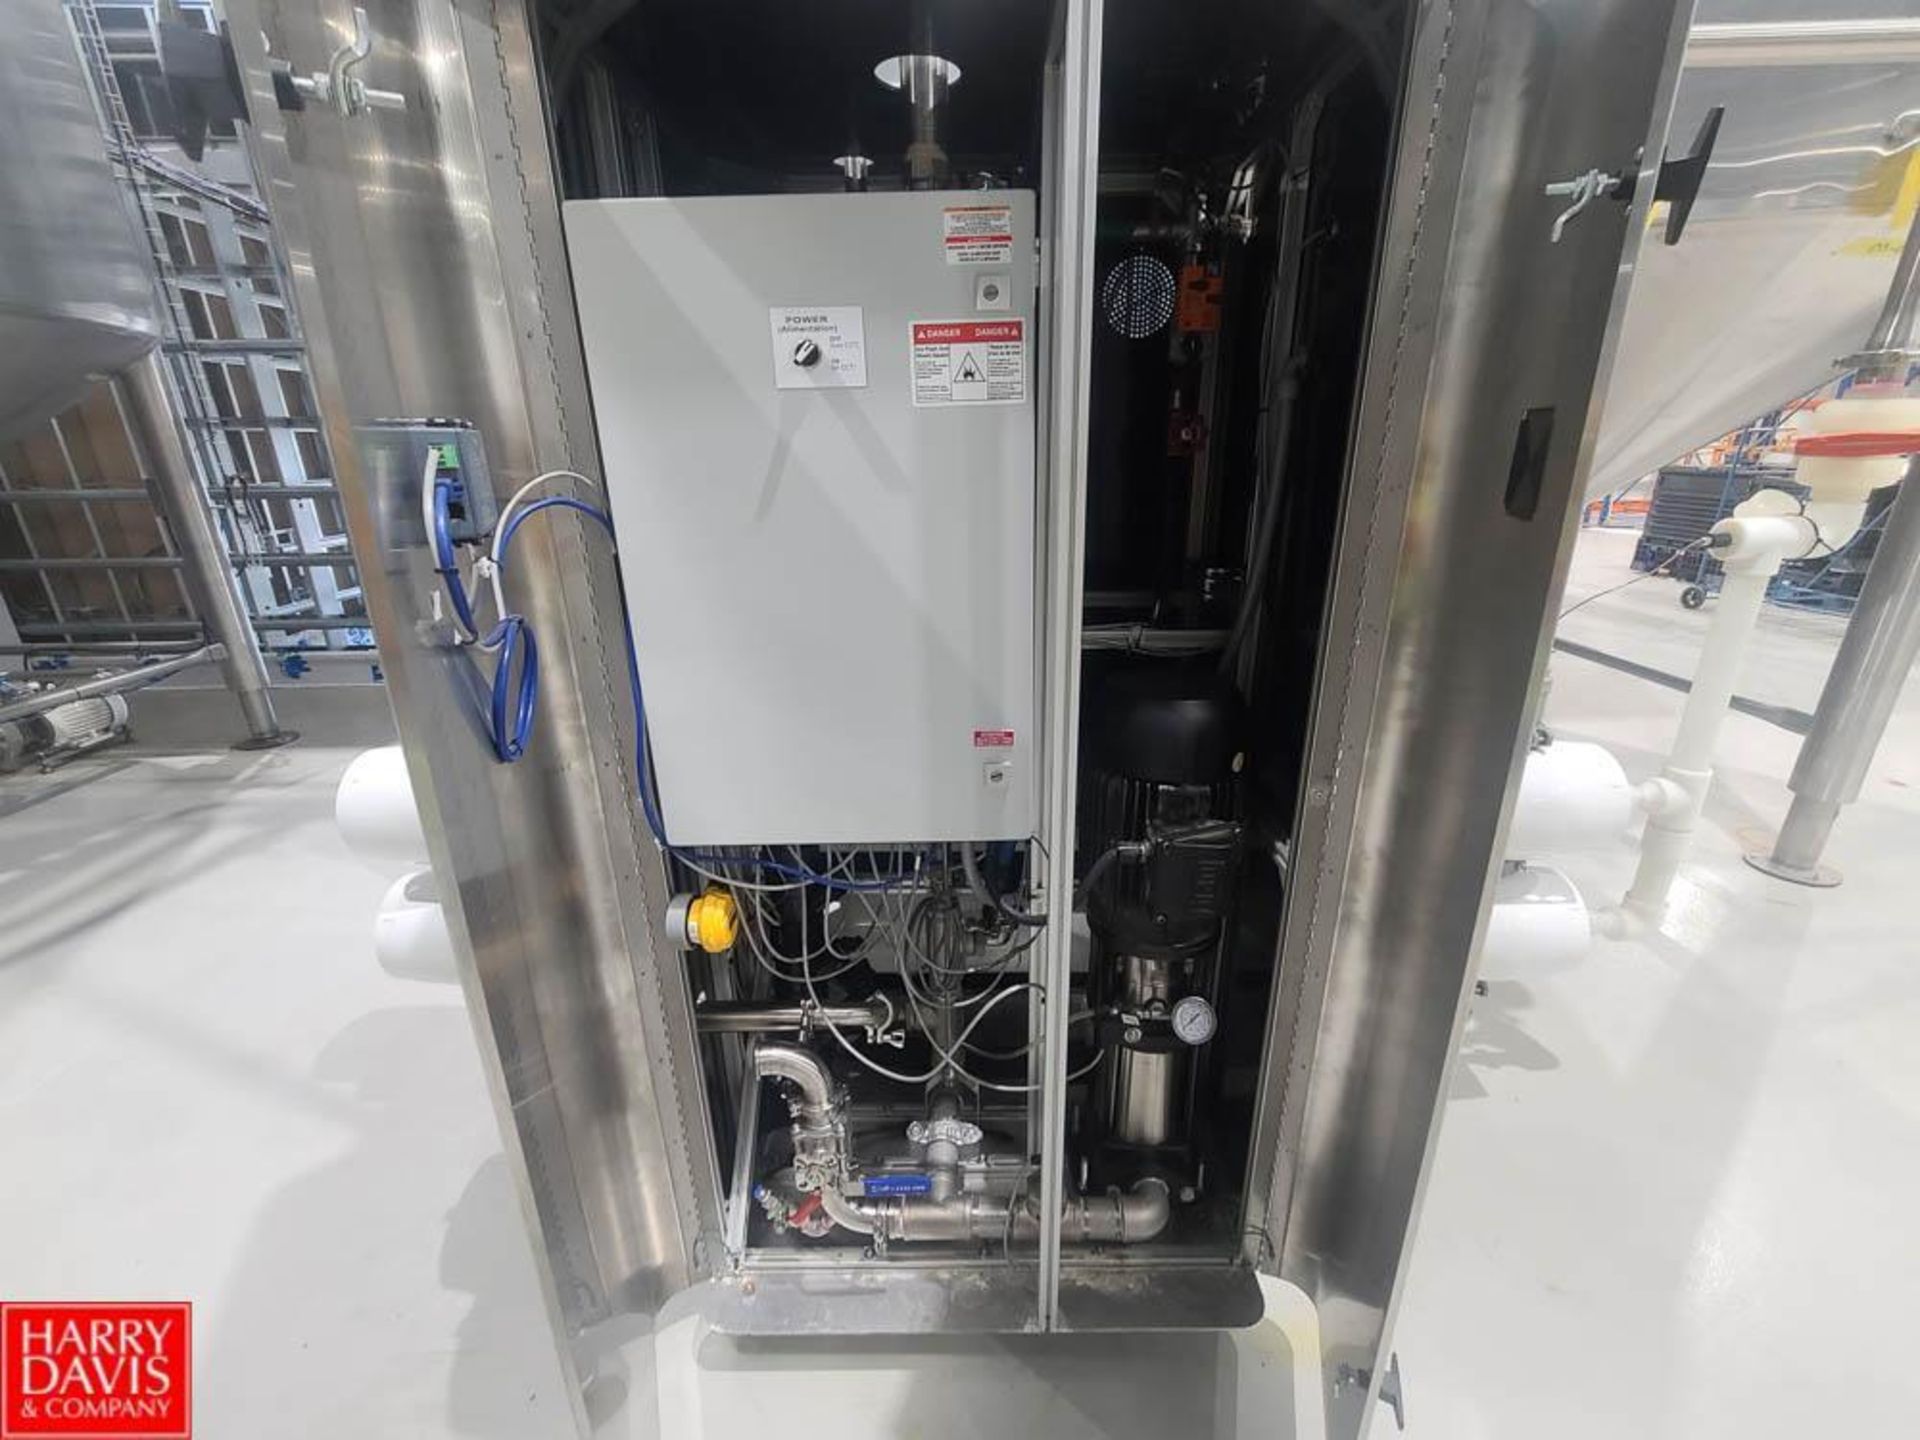 2021 OBLX 2-Tube Reverse Osmosis System, 60 LPM Model: MEGA-O-PURE with Pentair, Tubes, Pump,Siemens - Image 4 of 8